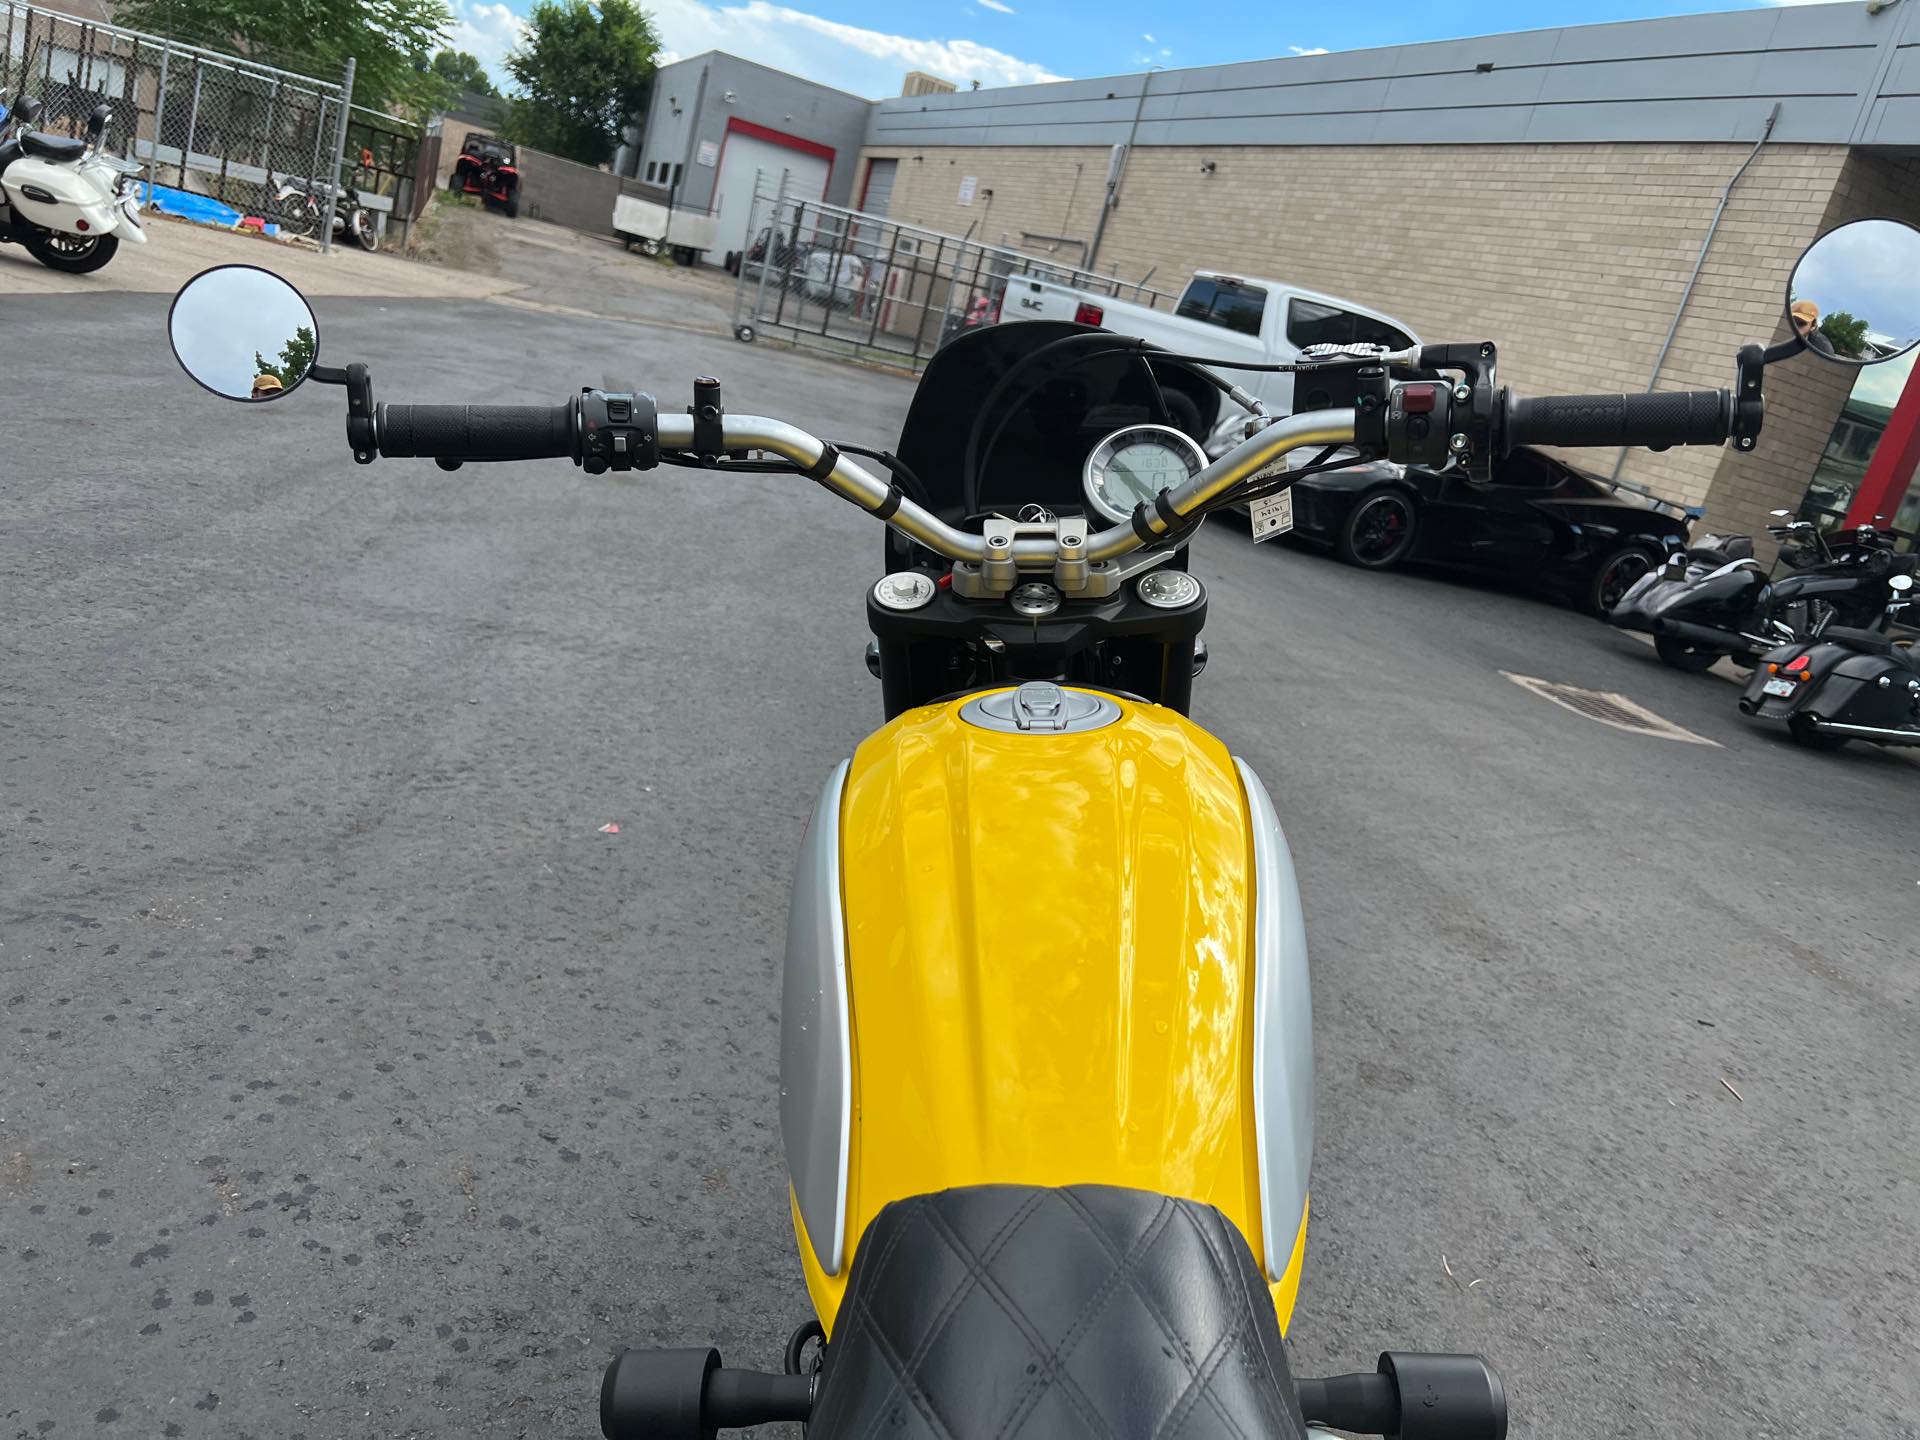 2015 Ducati Scrambler Icon at Aces Motorcycles - Fort Collins